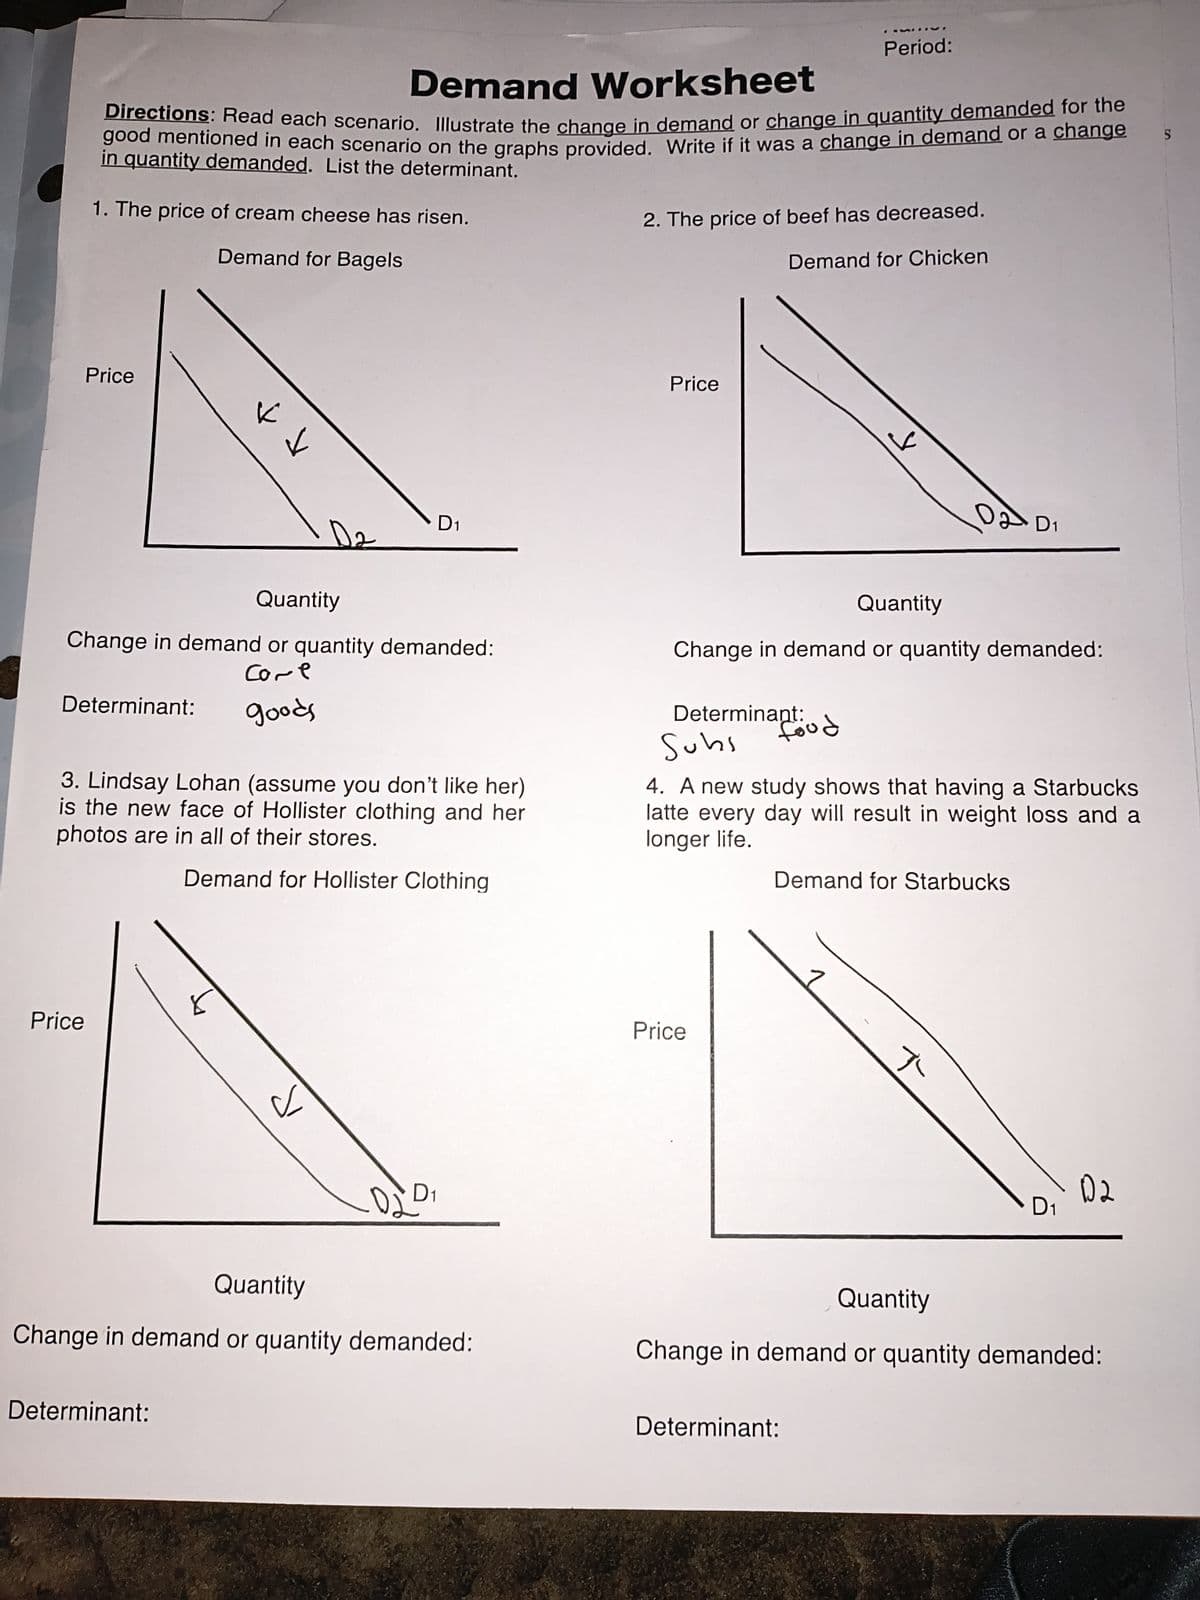 Period:
Demand Worksheet
Directions: Read each scenario. Illustrate the change in demand or change in quantity demanded for the
good mentioned in each scenario on the graphs provided. Write if it was a change in demand or a change
in quantity demanded. List the determinant.
1. The price of cream cheese has risen.
Demand for Bagels
2. The price of beef has decreased.
Demand for Chicken
S
Price
D1
D2
Quantity
Price
لا
Quantity
DD1
Change in demand or quantity demanded:
Determinant:
Come
goods
3. Lindsay Lohan (assume you don't like her)
is the new face of Hollister clothing and her
photos are in all of their stores.
Demand for Hollister Clothing
Change in demand or quantity demanded:
food
Determinant:
Subs
4. A new study shows that having a Starbucks
latte every day will result in weight loss and a
longer life.
Demand for Starbucks
Price
с
020
D1
Price
ད་
02
D1
Quantity
Change in demand or quantity demanded:
Quantity
Change in demand or quantity demanded:
Determinant:
Determinant: